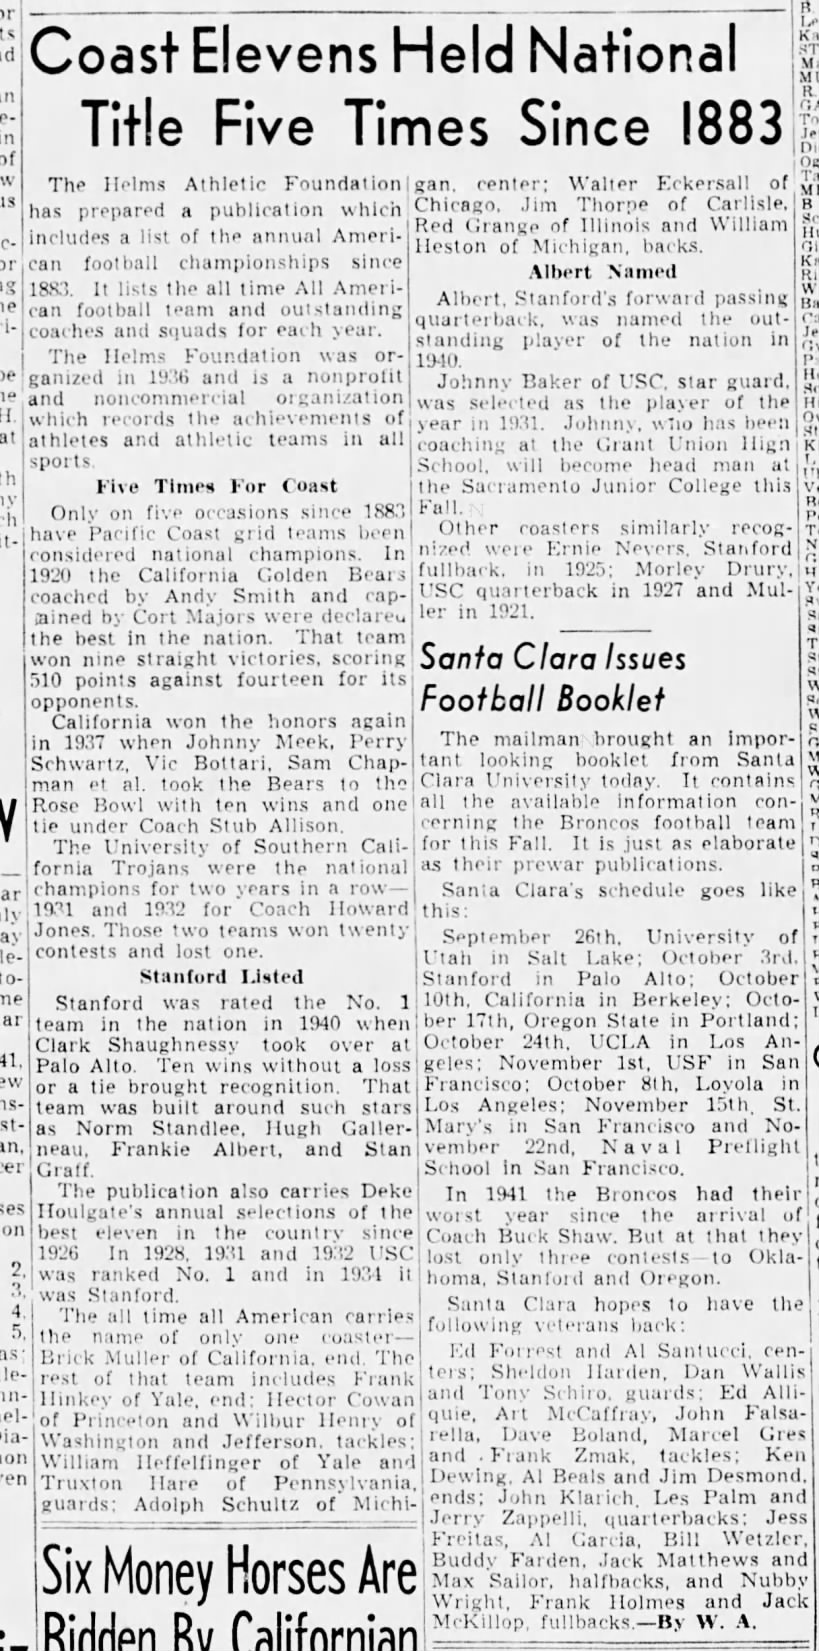 Helms Athletic Foundation Football Record August 1942 discussion of national championships